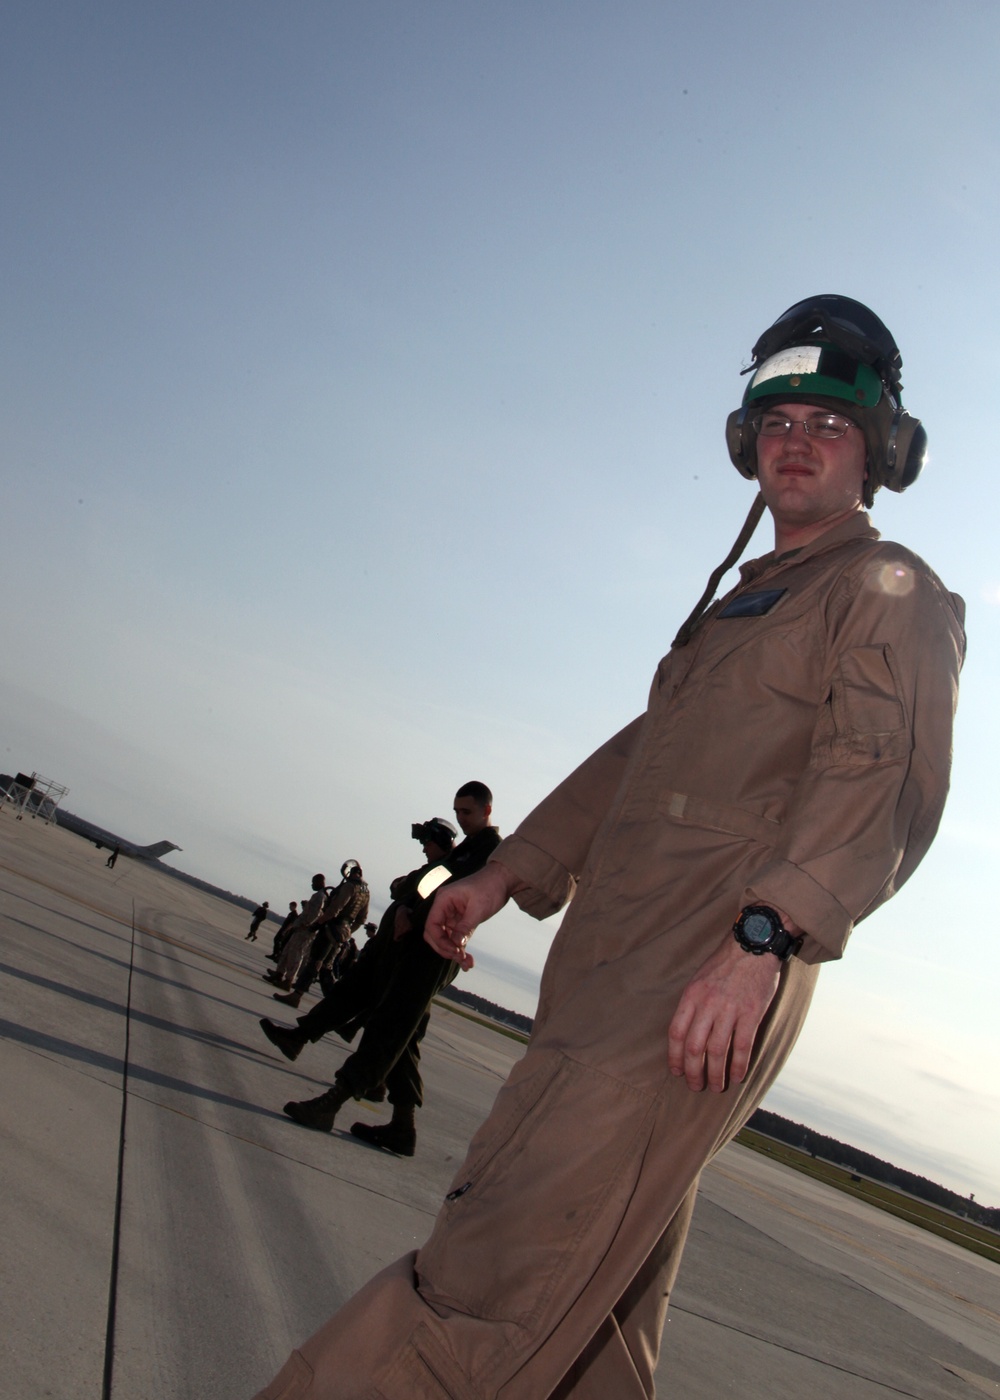 Cherry Point Marine shares his day aboard air station